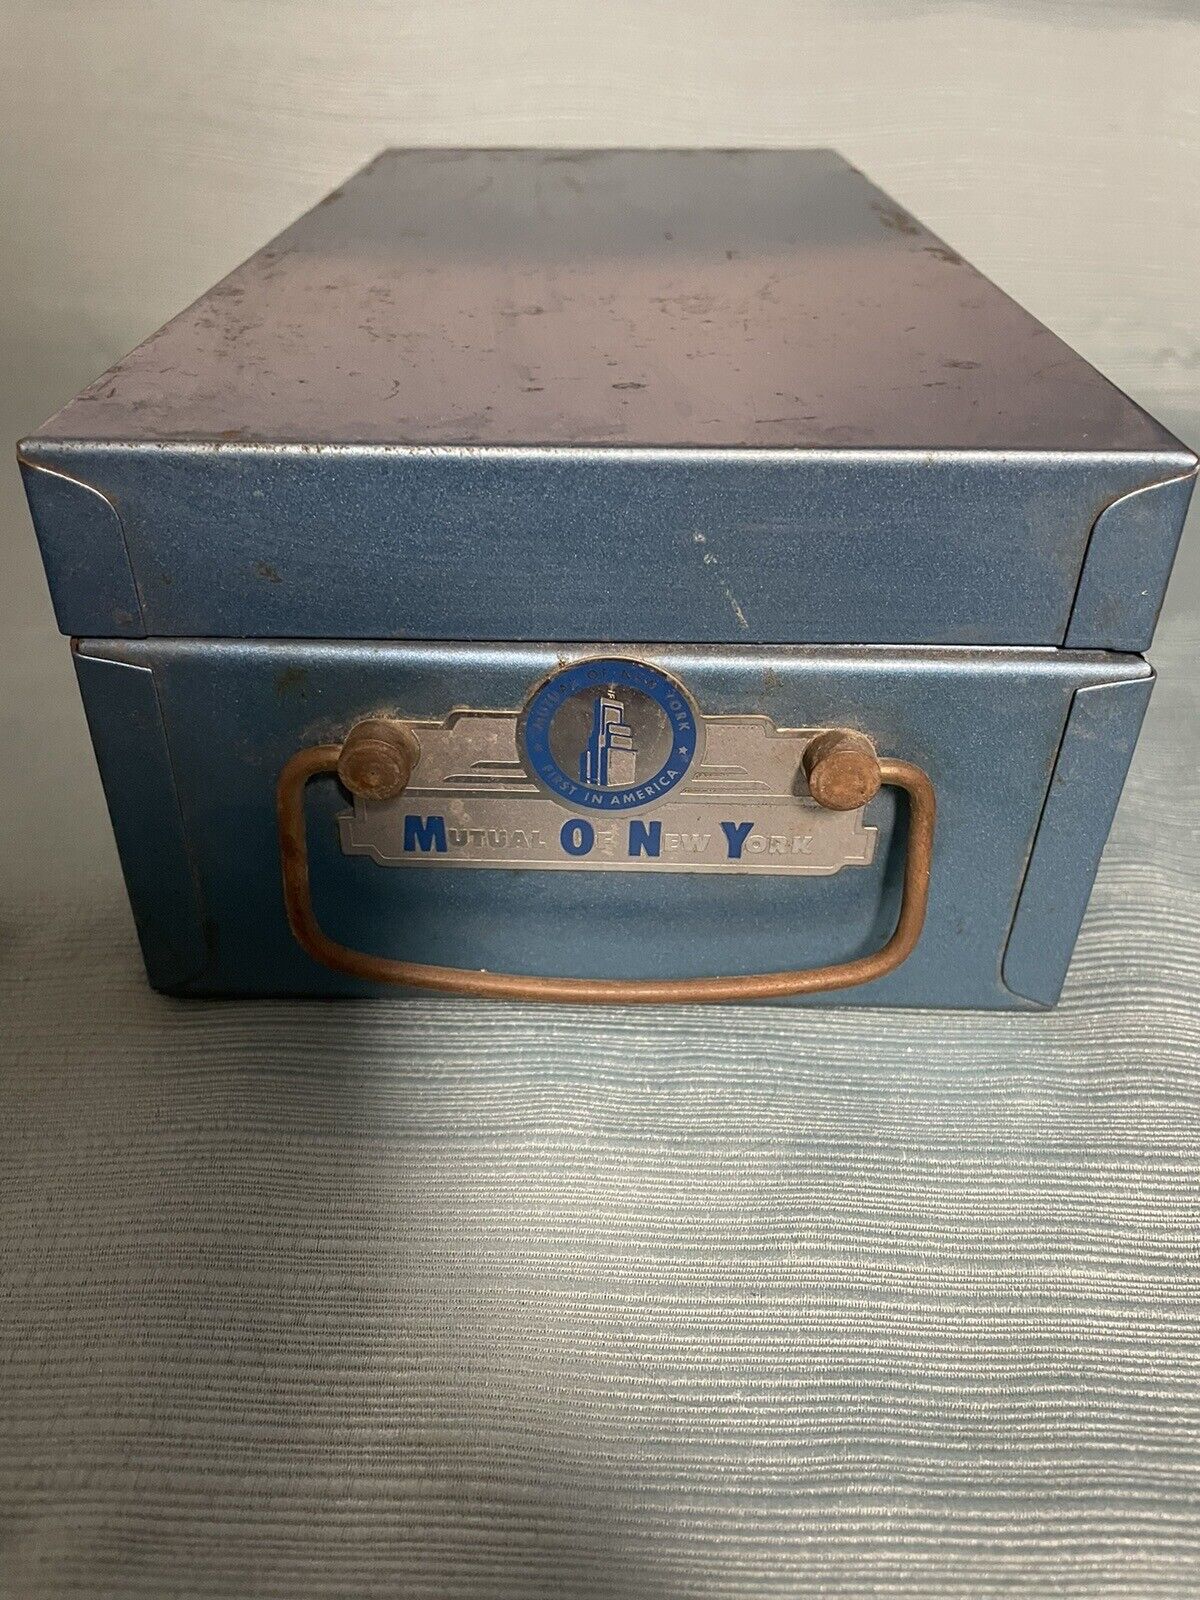 Vtg Bemis & Call Co Sesamee Combination Lock Safe Policy Box Mutual Of New York